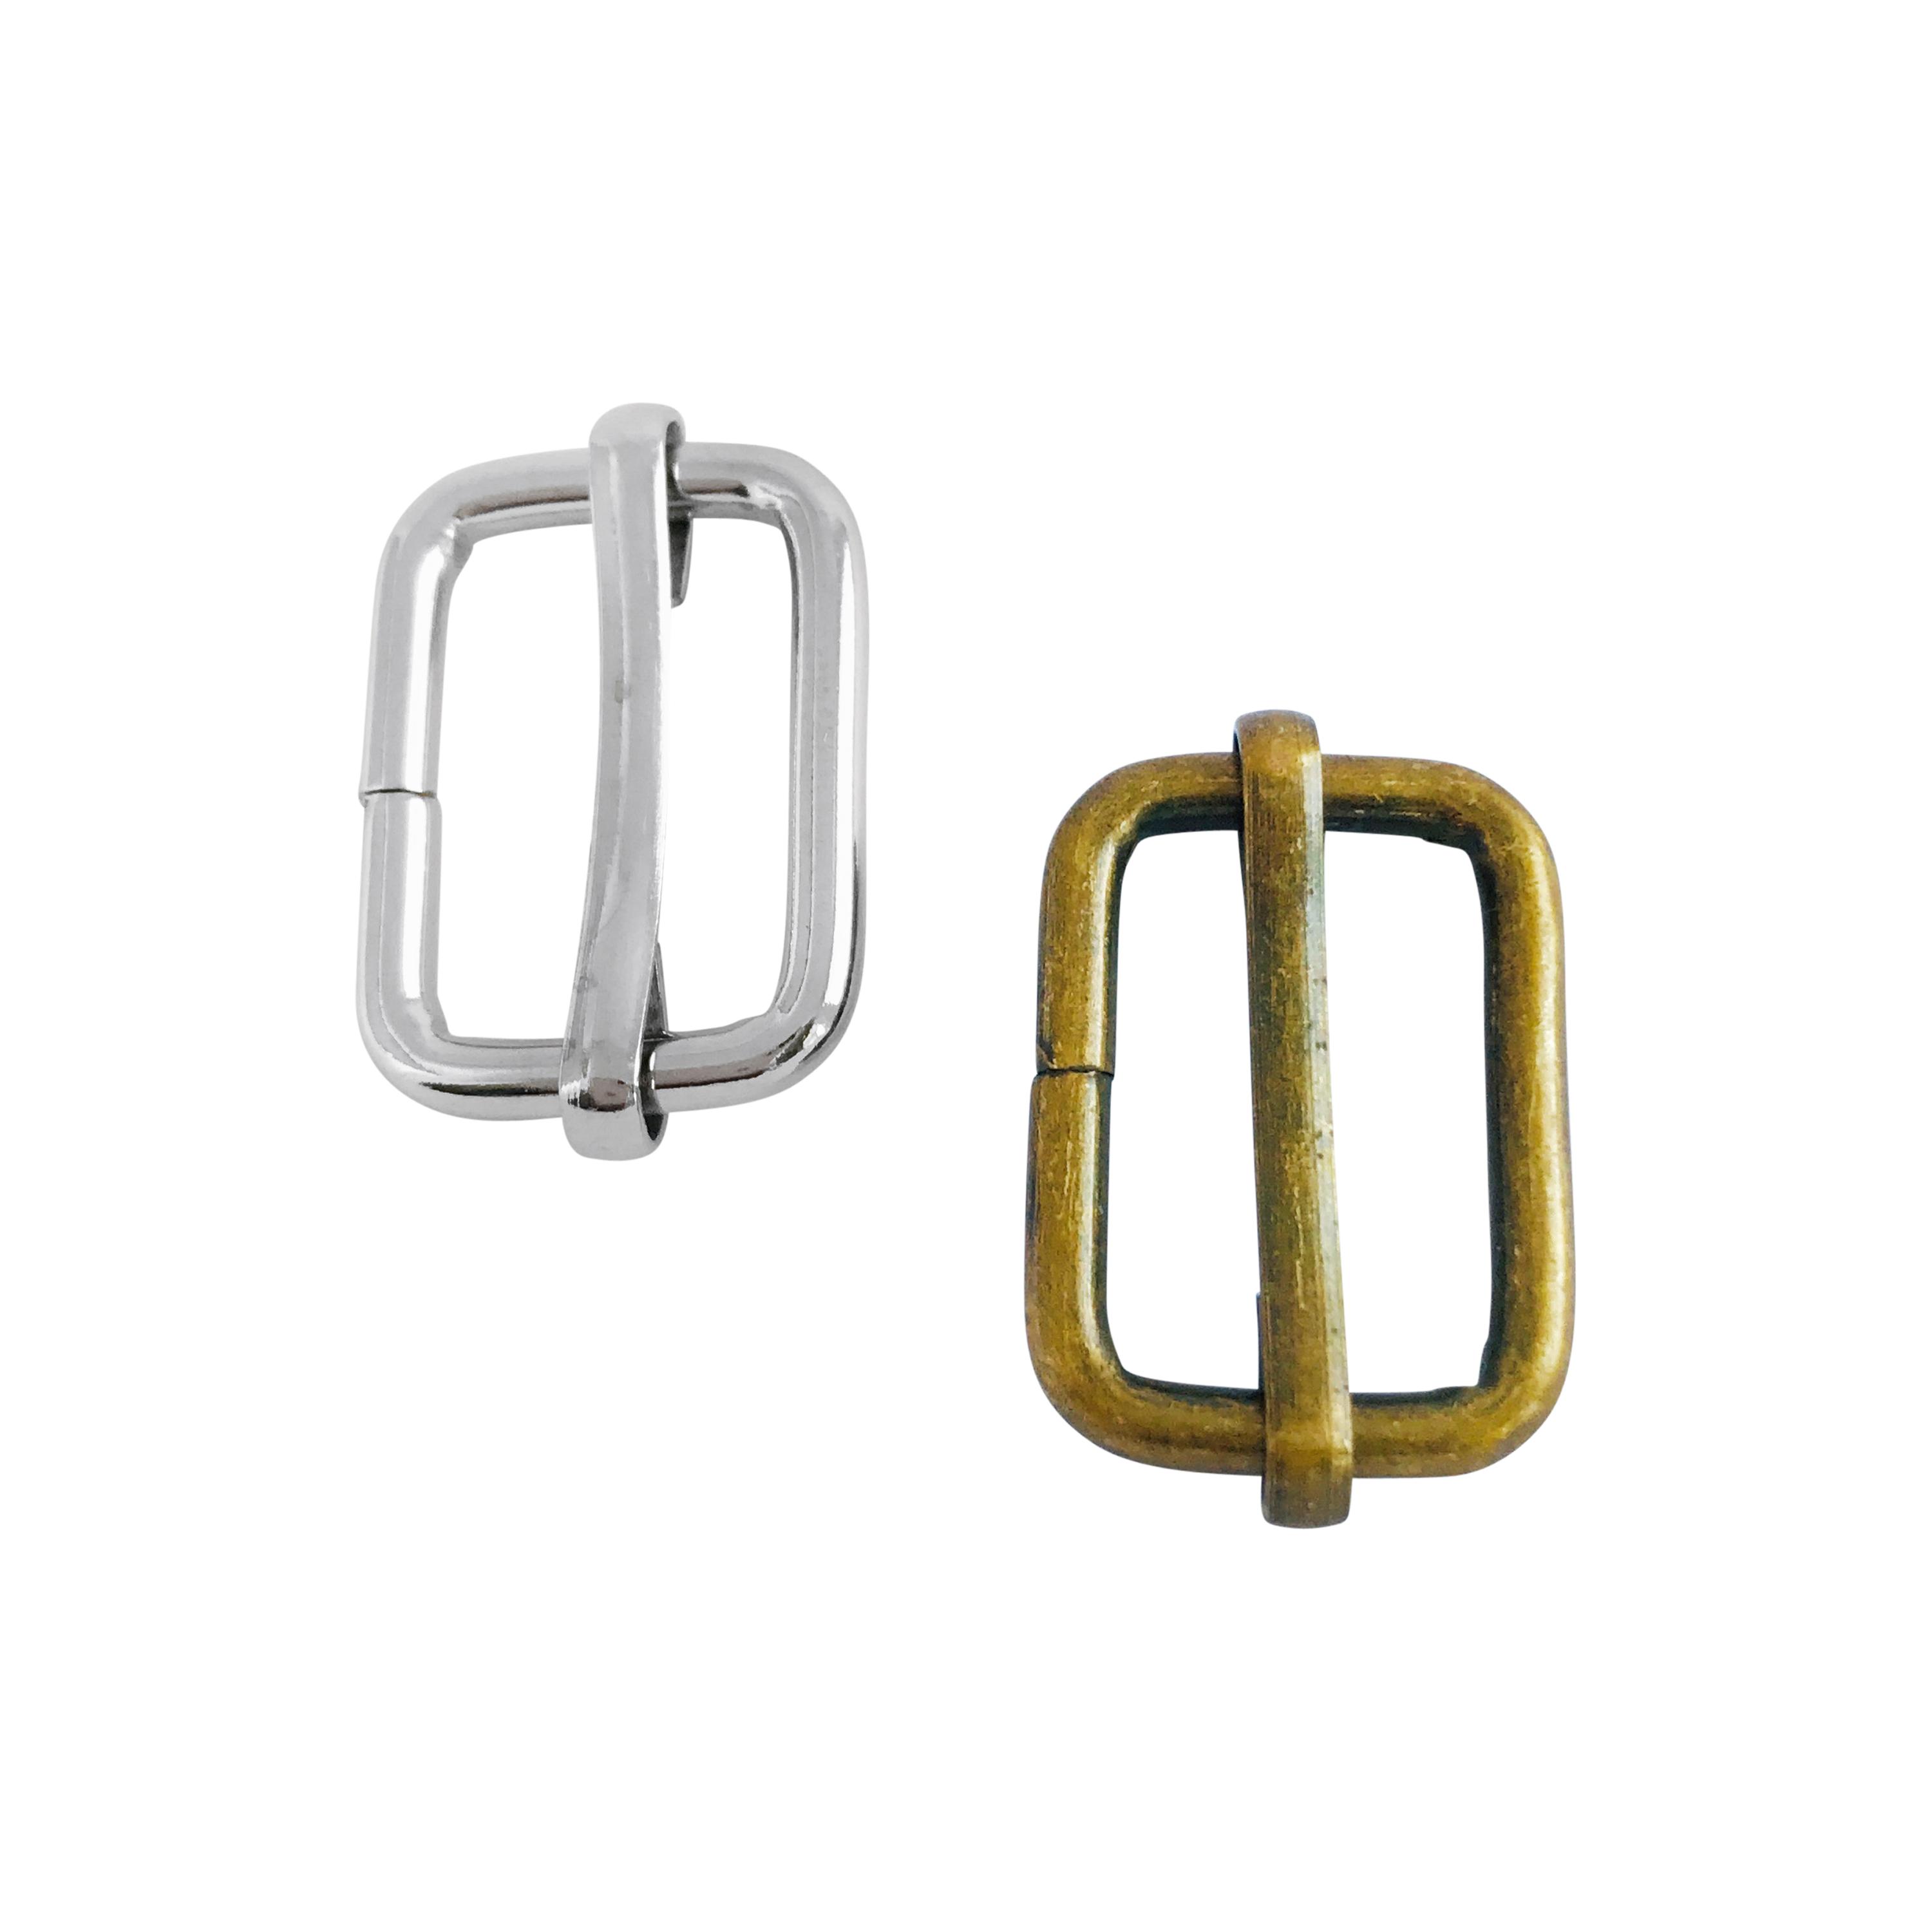 1/2" slider buckle in silver or antique brass perfect for making narrow bag handles